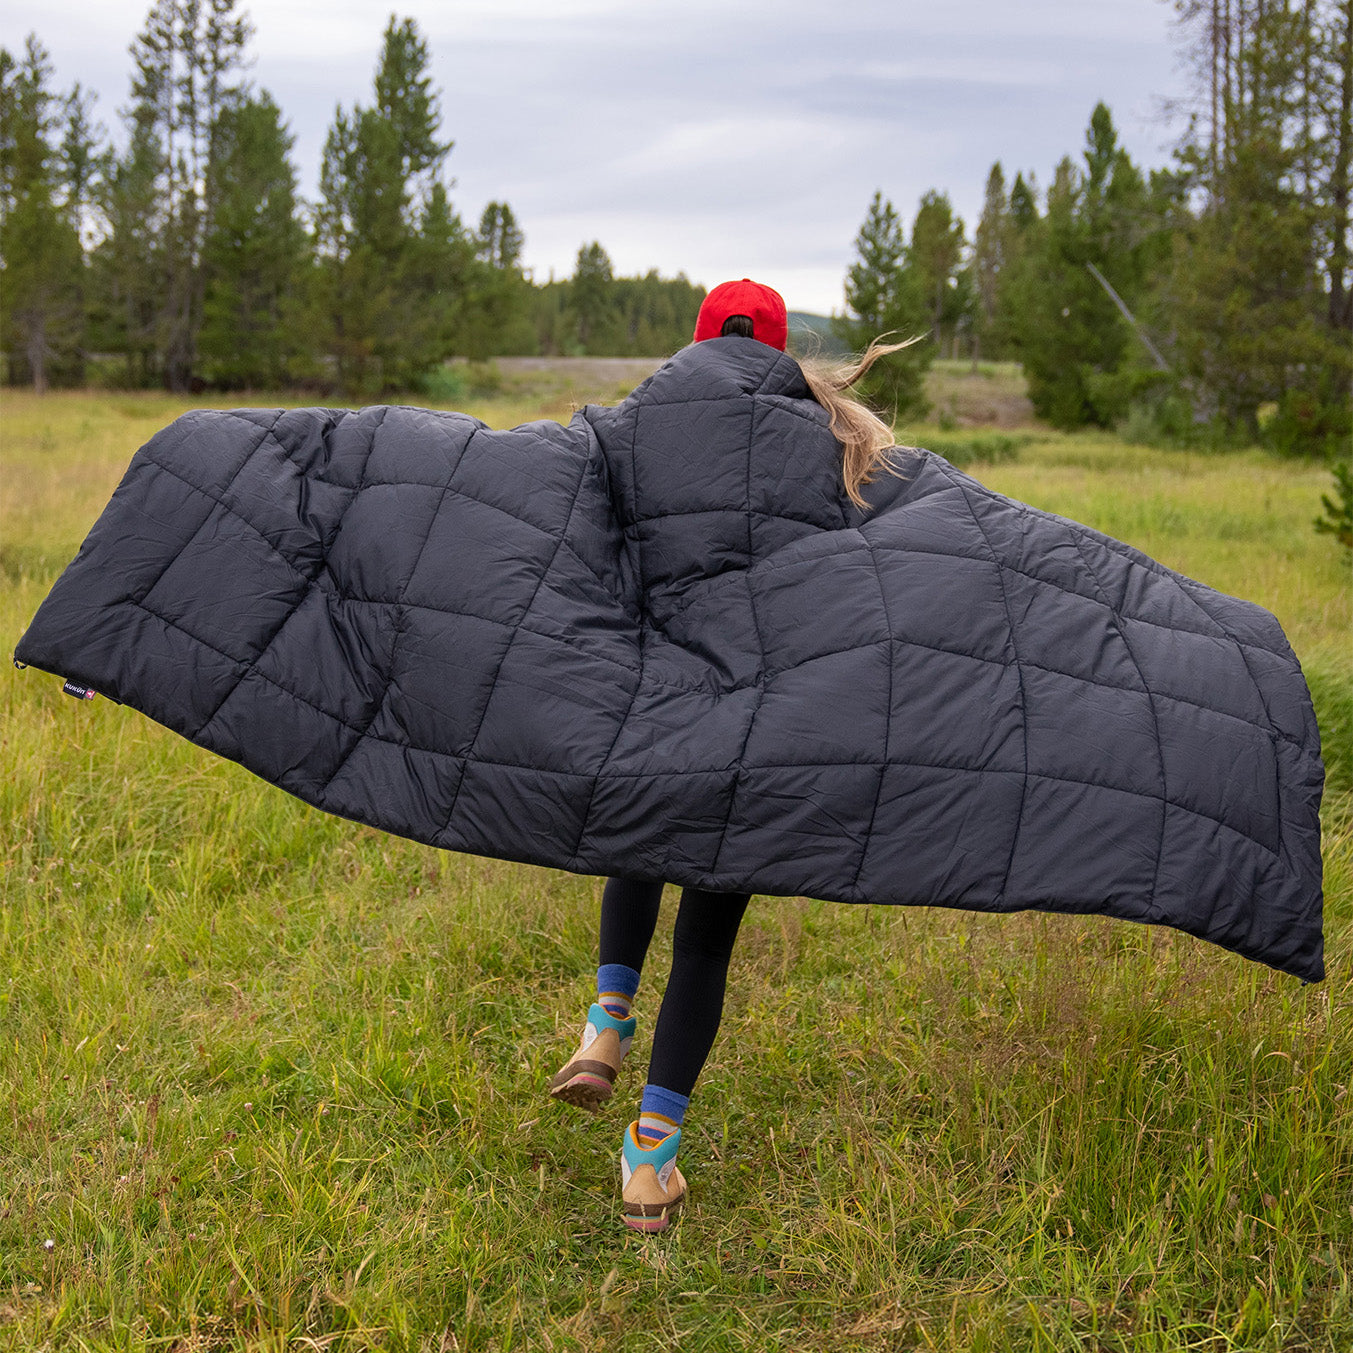 What is the ideal weight for a camping blanket?